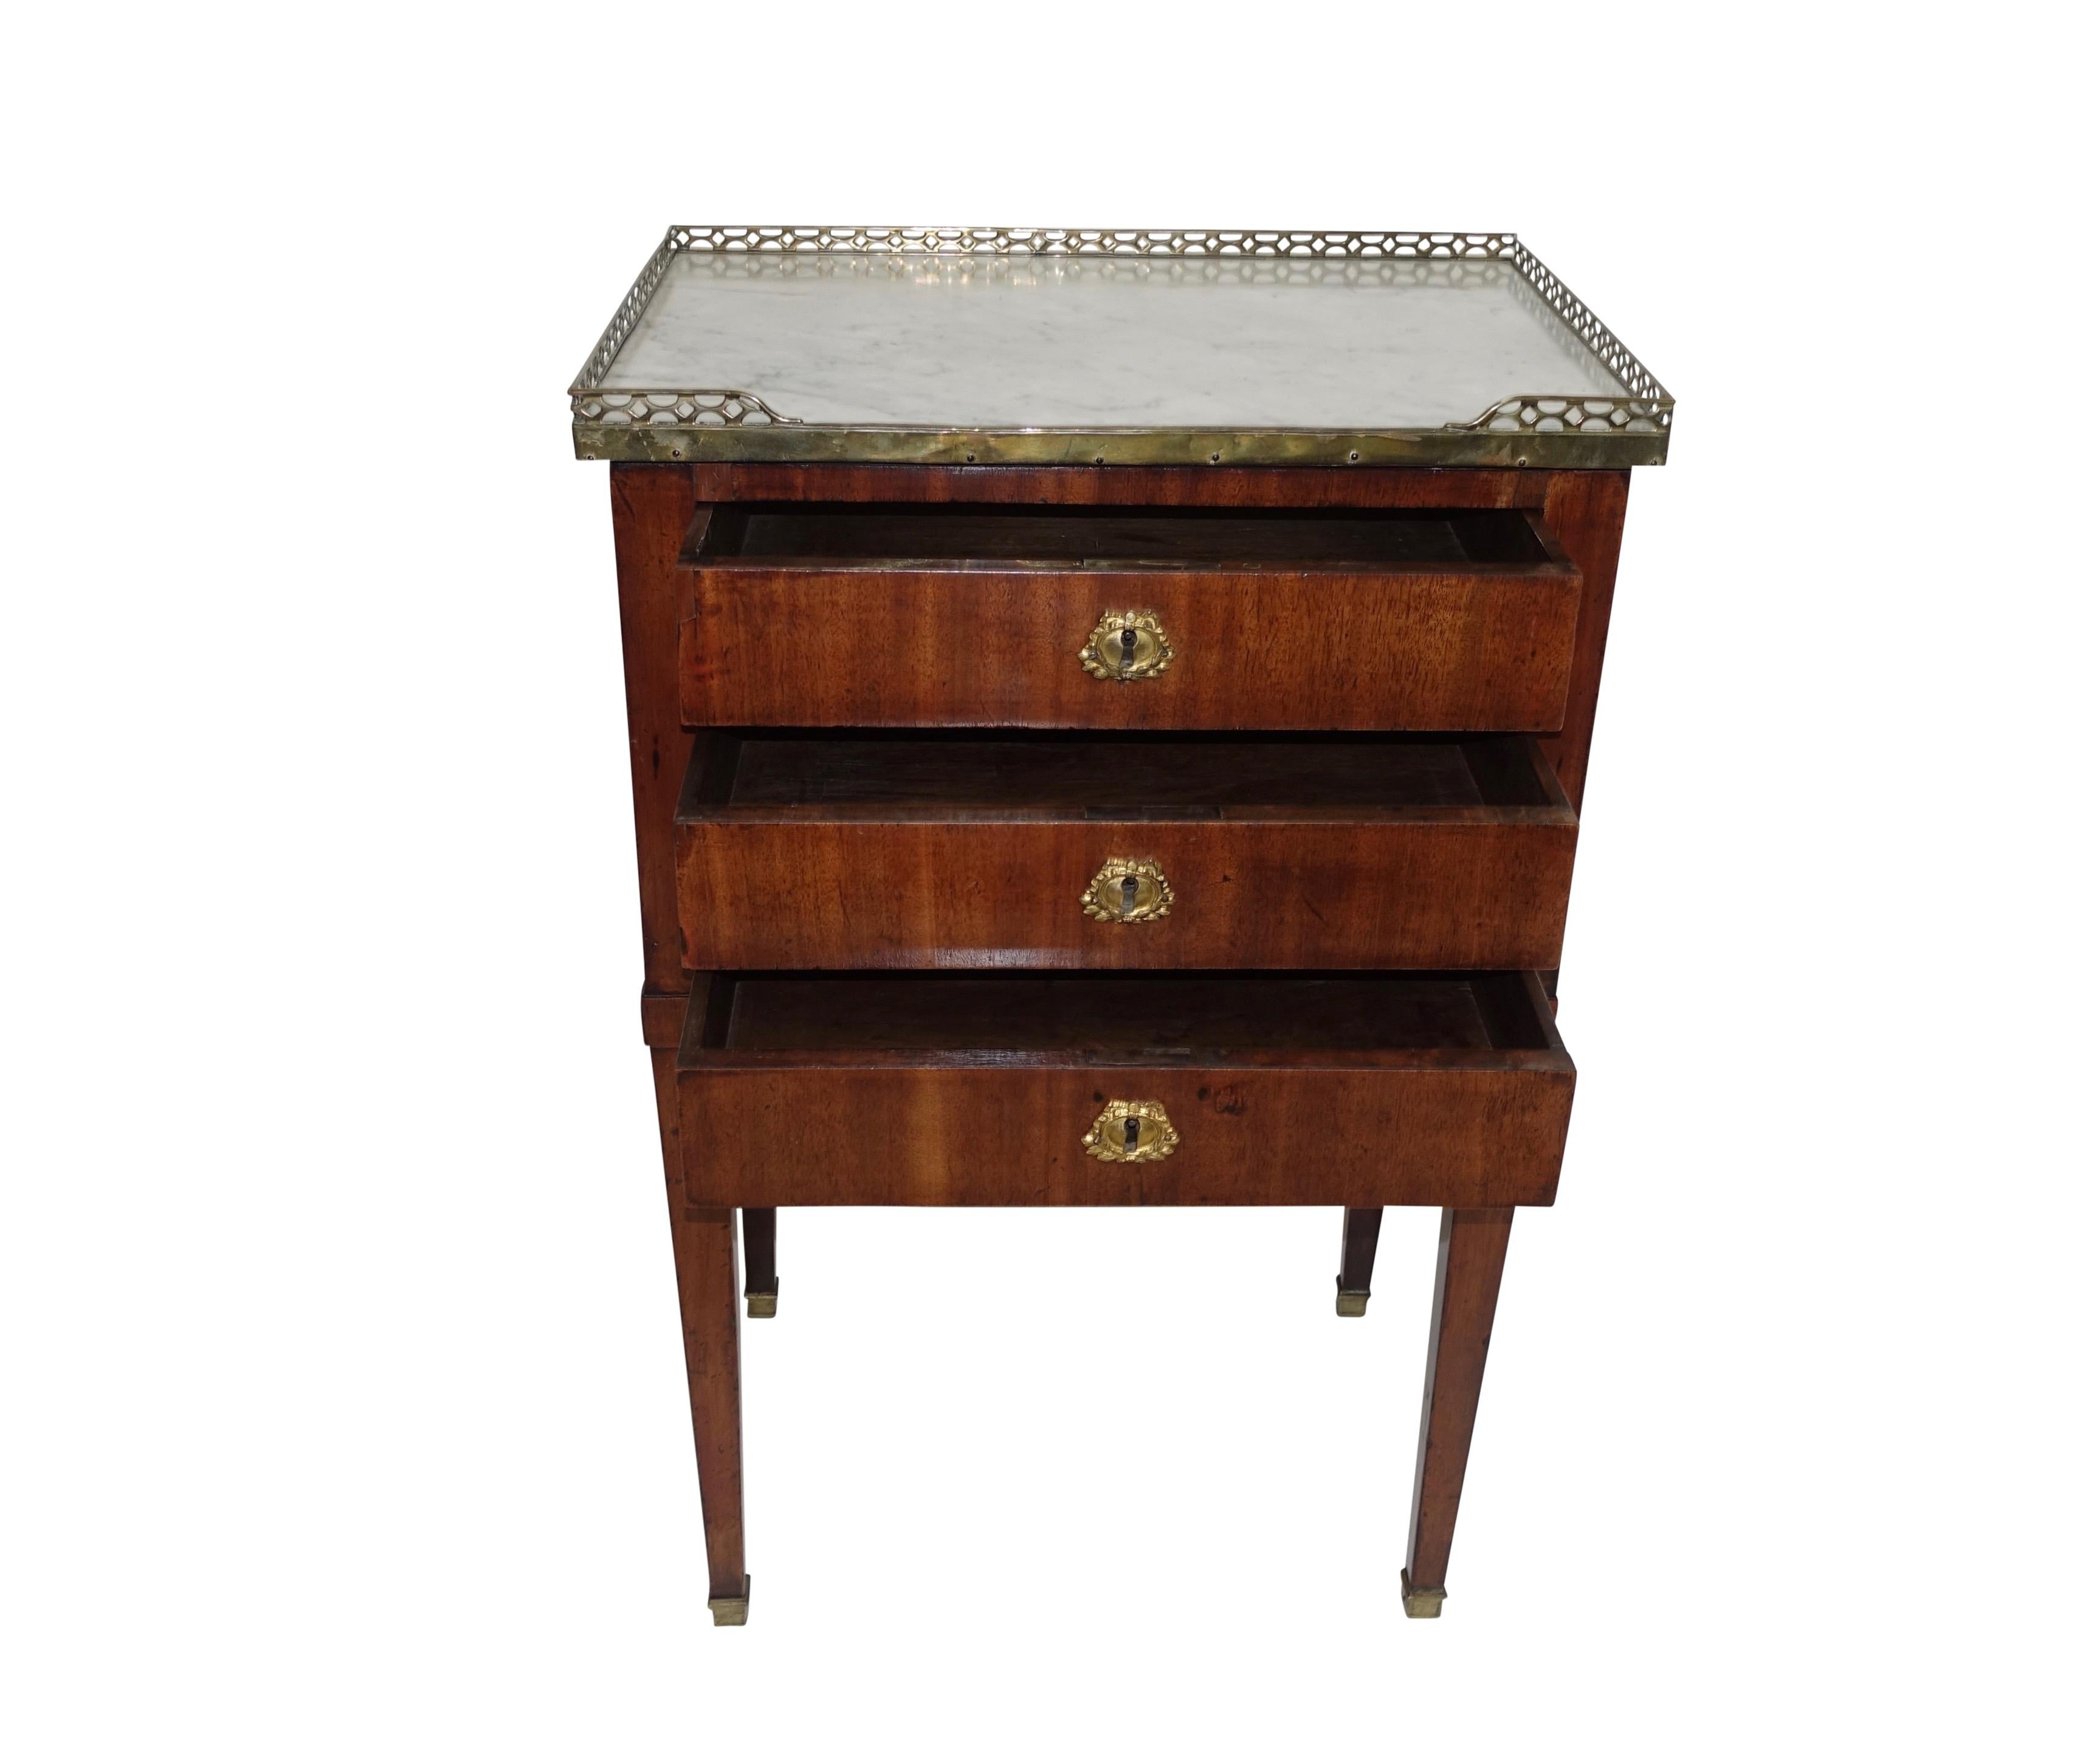 Louis XVI style mahogany work table with pierced brass gallery around the white marble top surface, having three drawers, and standing on square tapering legs ending in brass sabots. France circa 1830

